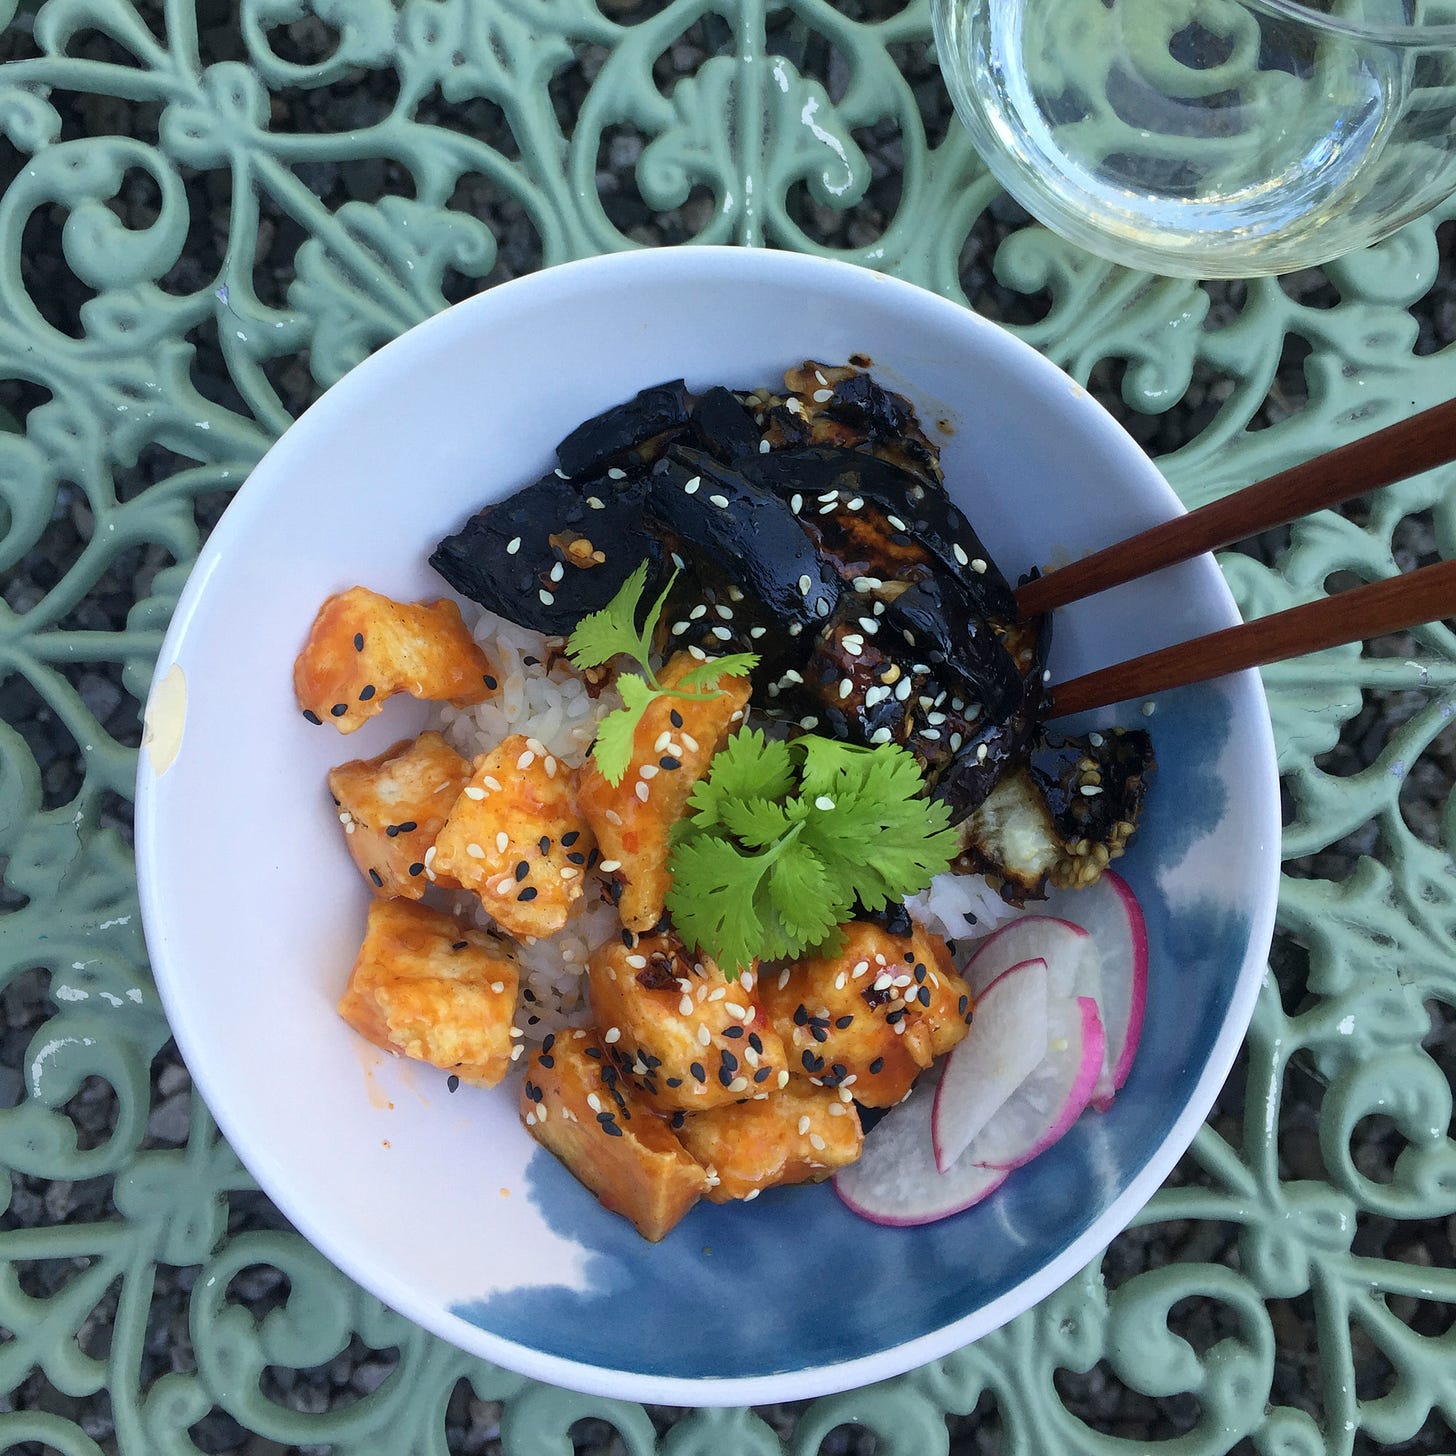 On an outdoor table, a white and blue bowl with chopsticks at one edge is filled with white rice, crispy tofu, and pieces of grilled eggplant. Everything is covered in an orangey sweet chili sauce, and radishes, sesame seeds, and cilantro garnish the top.